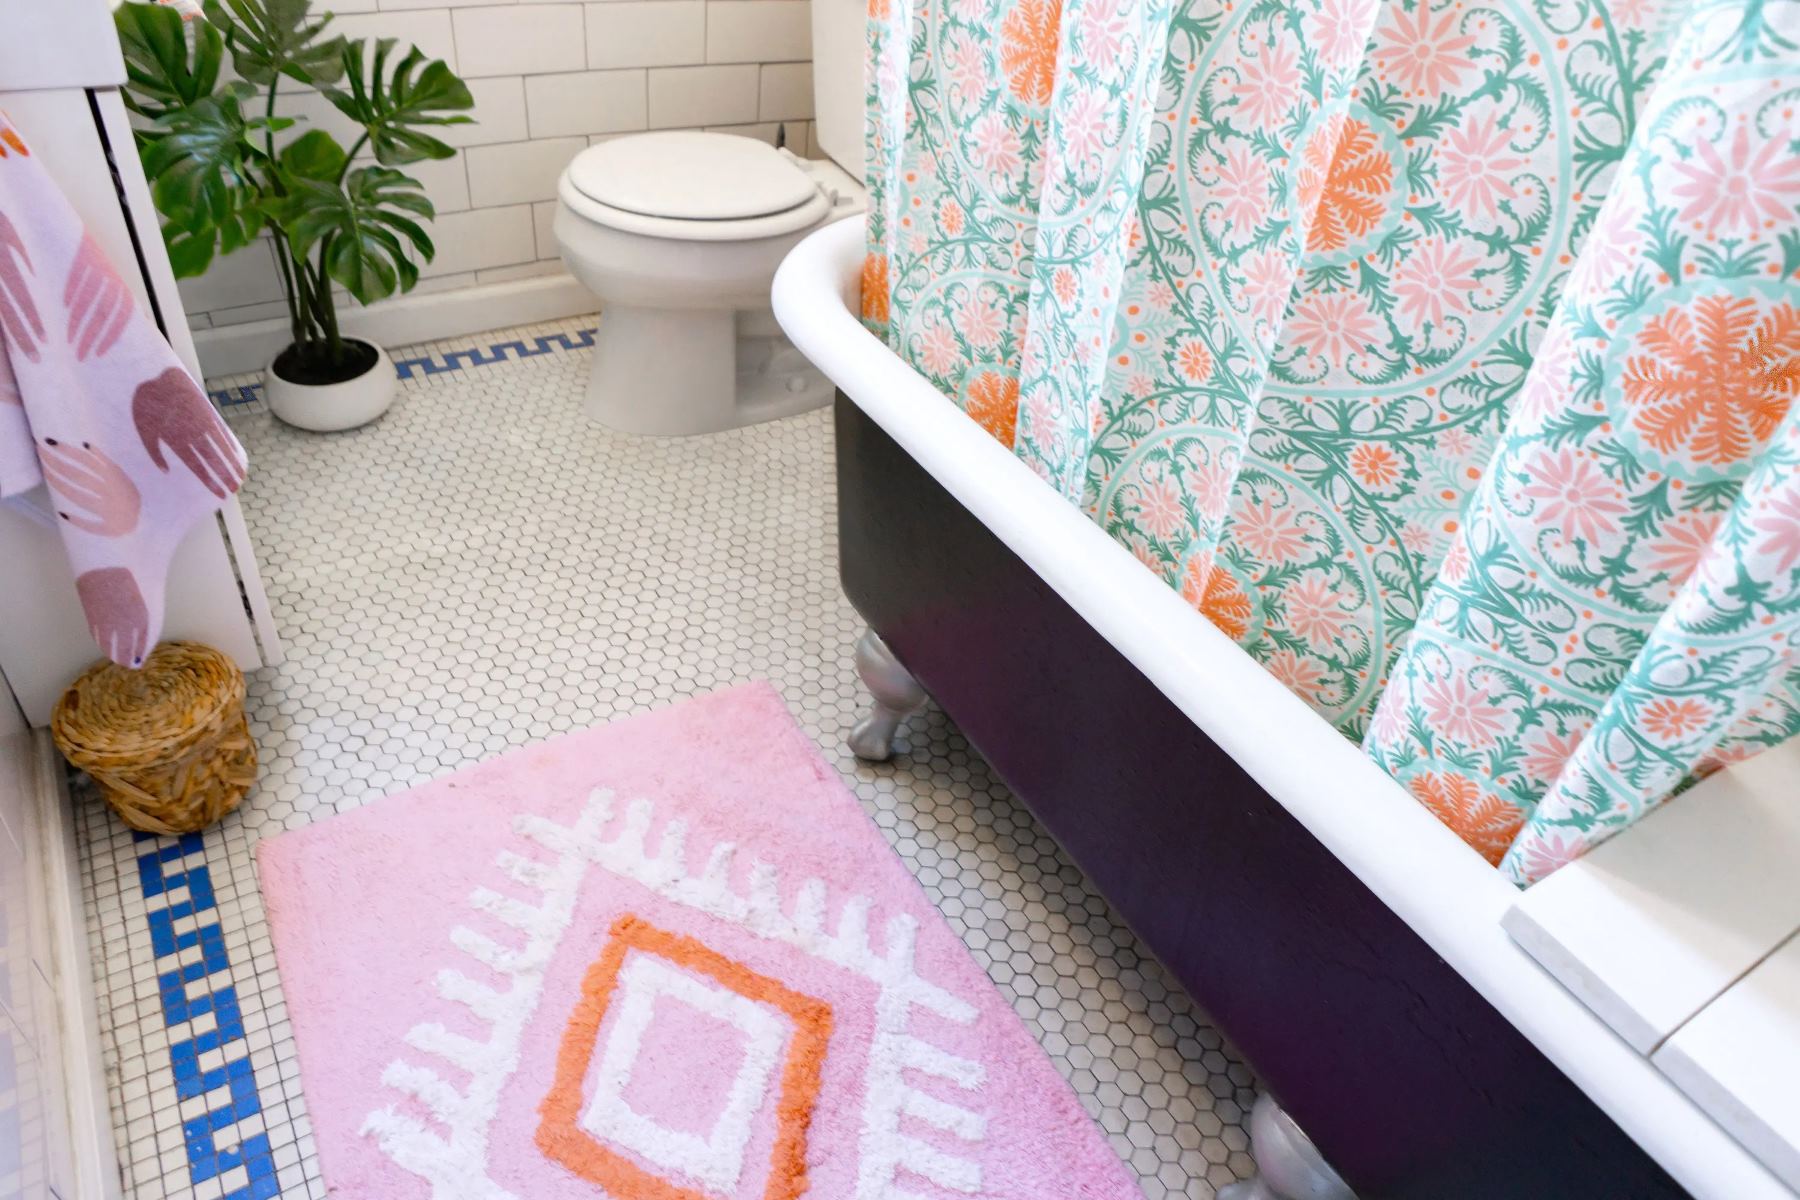 How To Keep Bathroom Rugs From Slipping